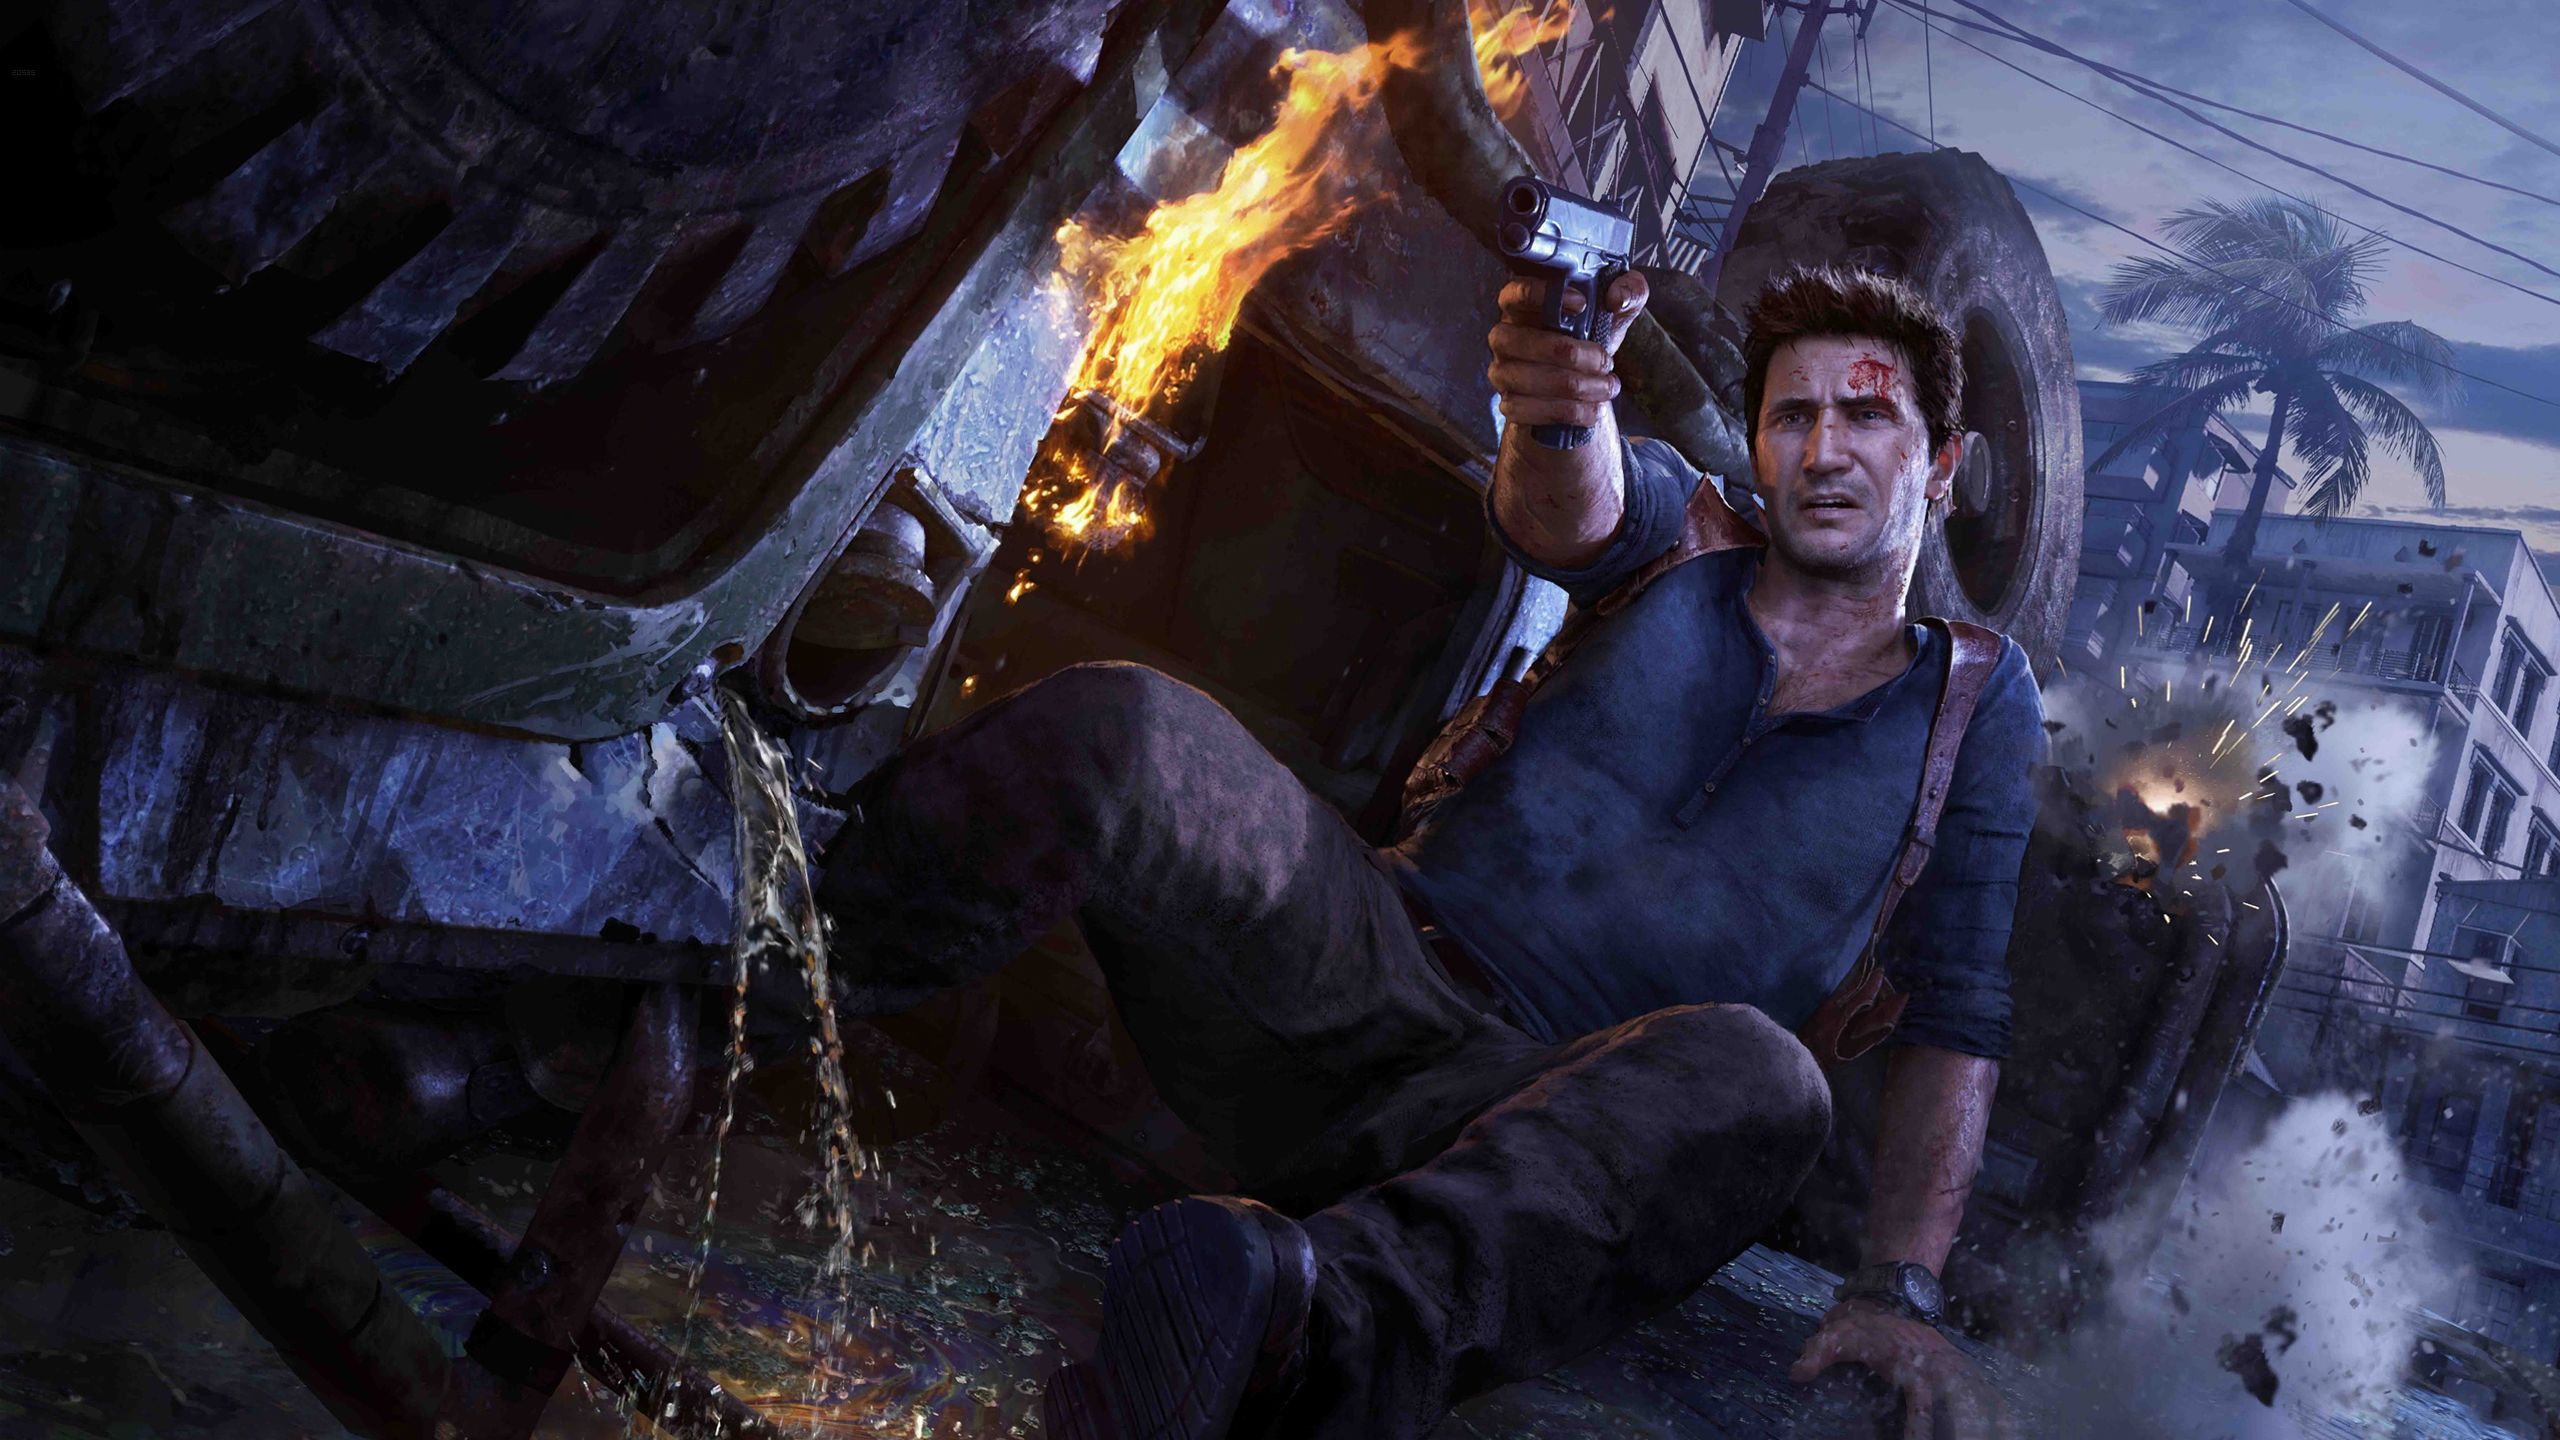 Uncharted 4: A Thief's End Wallpaper Free Uncharted 4: A Thief's End Background